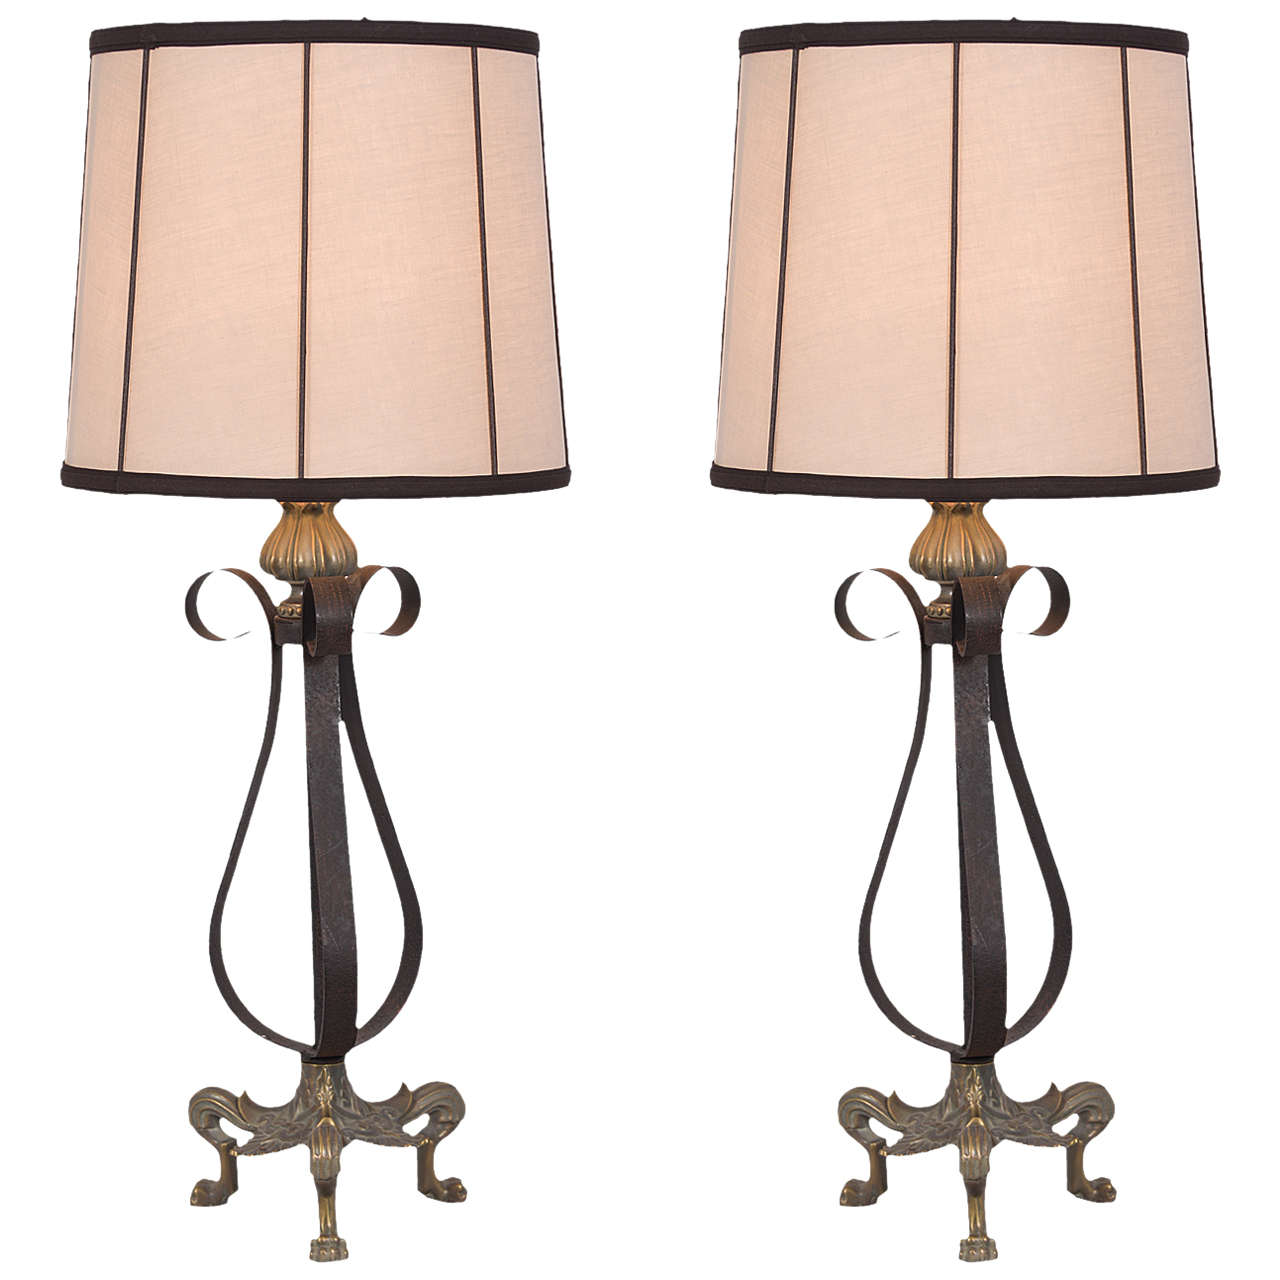 Pair of Neoclassical Design Table Lamps For Sale